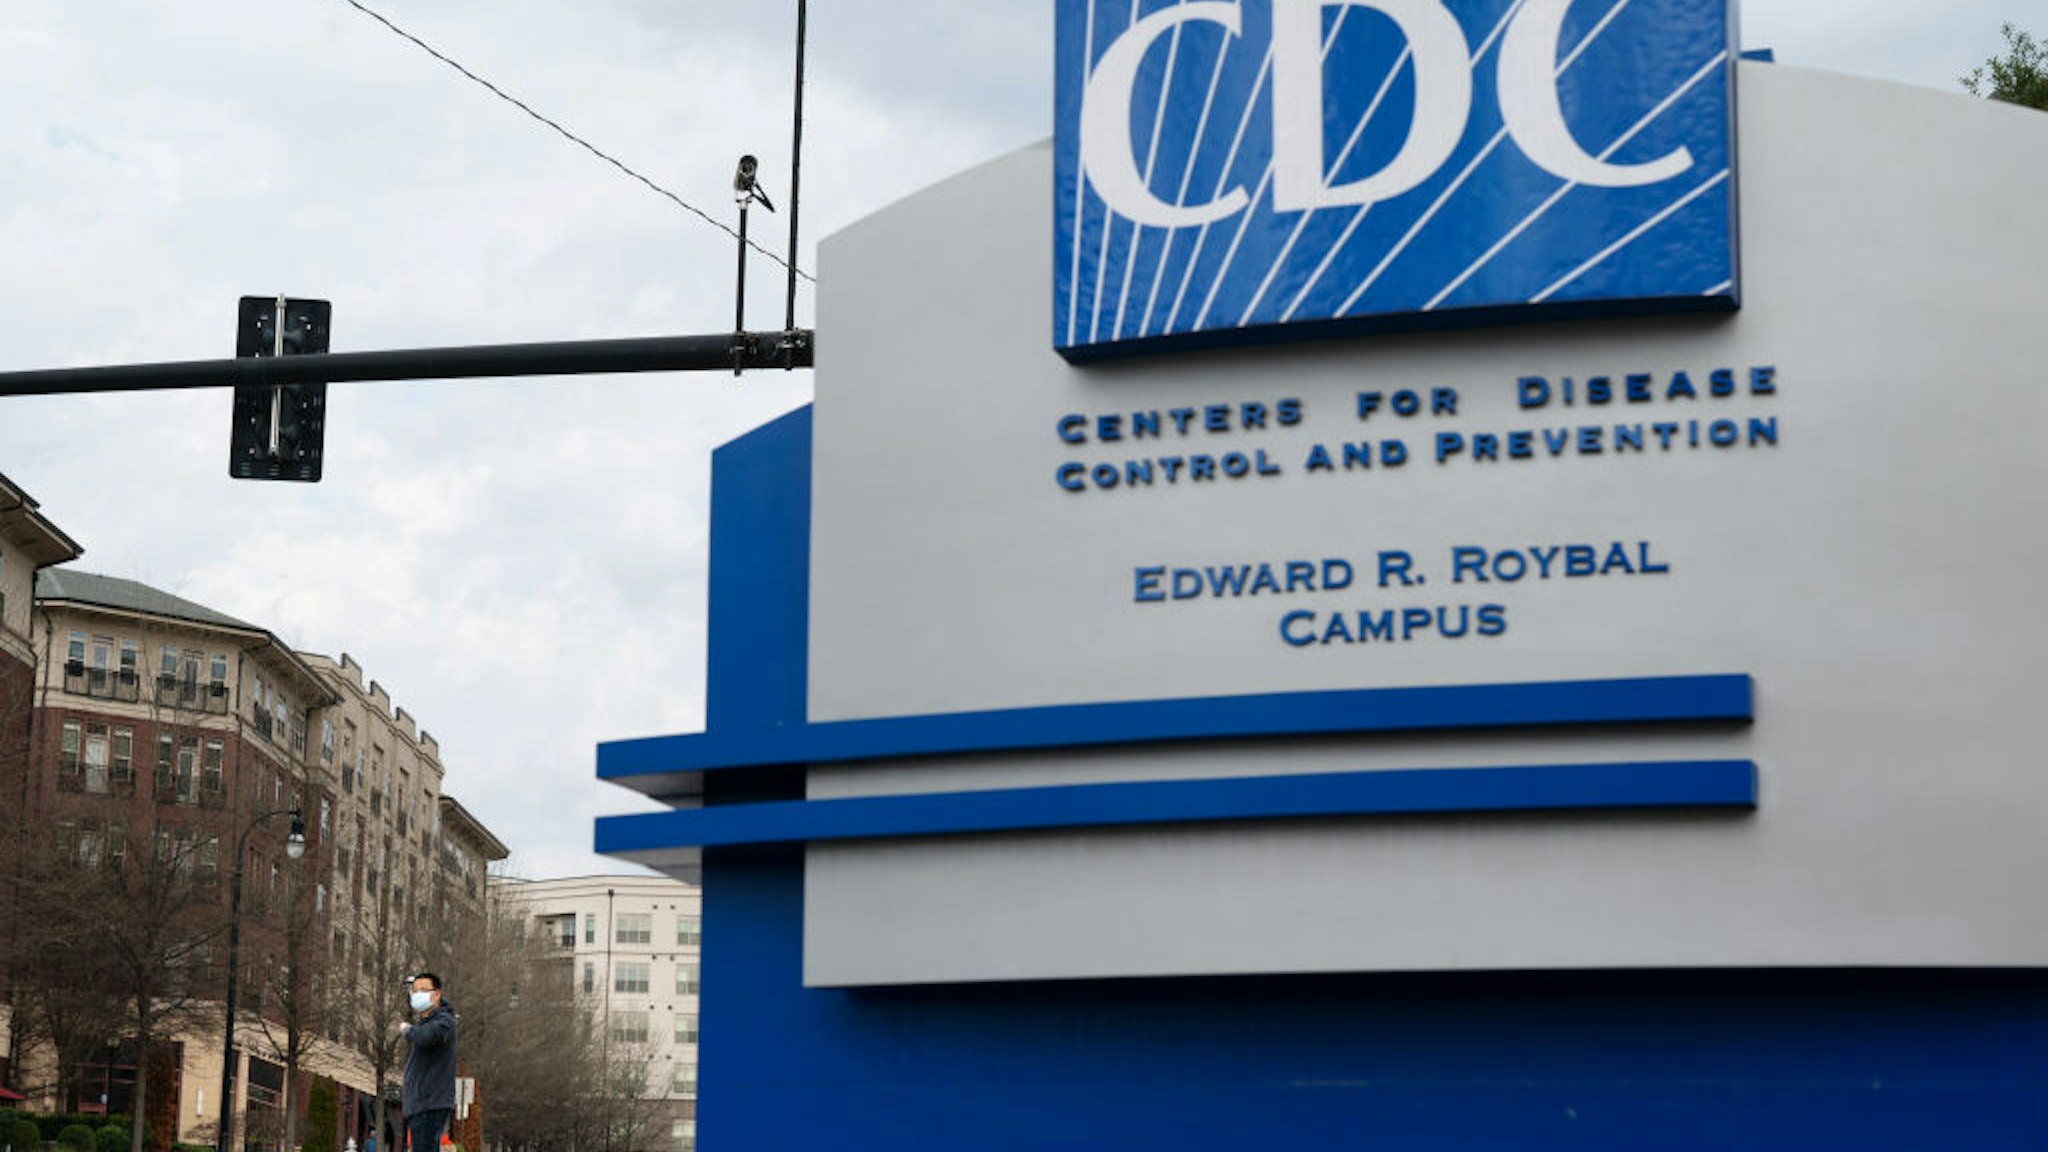 A pedestrian wearing a protective face mask walks past the Centers for Disease Control and Prevention (CDC) headquarters in Atlanta, Georgia, U.S, on Saturday, March 14, 2020.